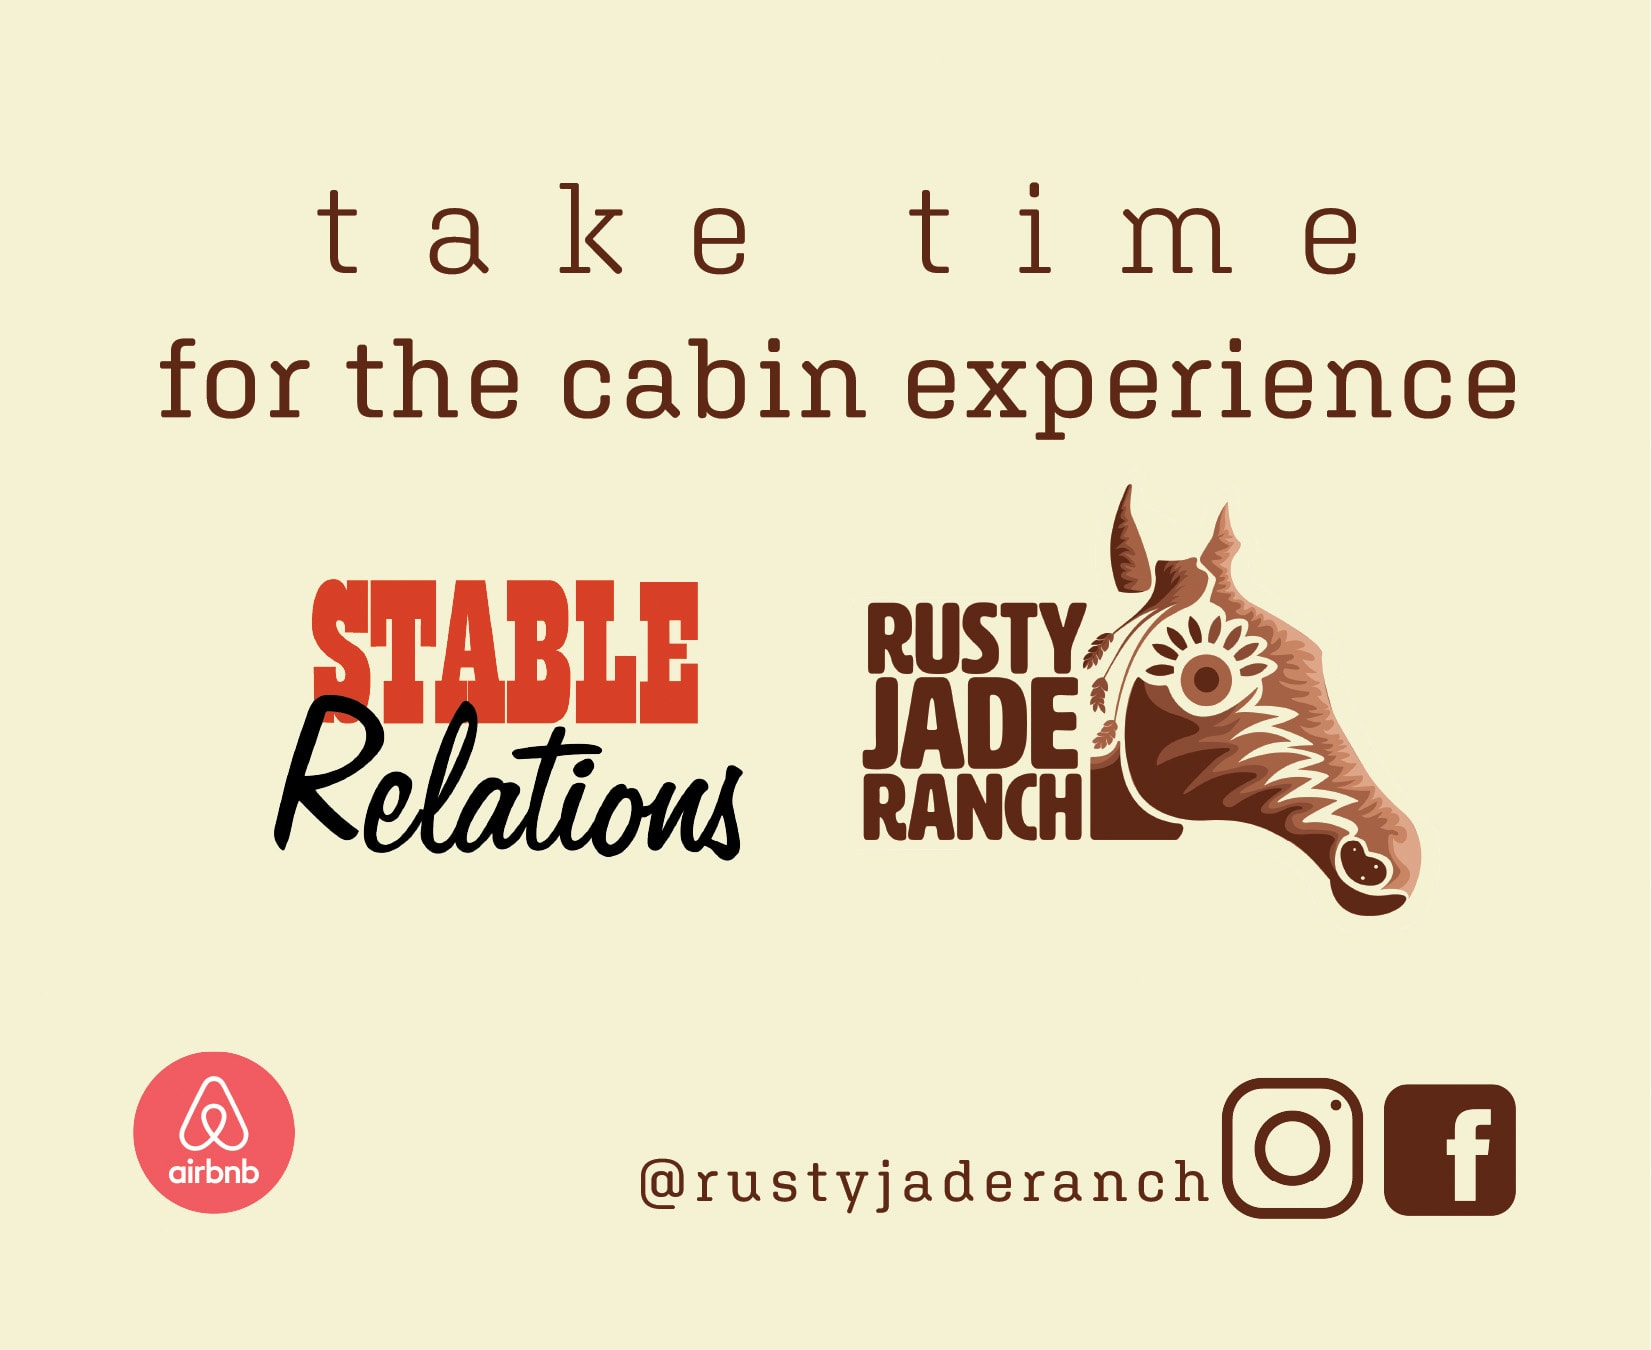 Stable Relations - Rusty Jade Ranch